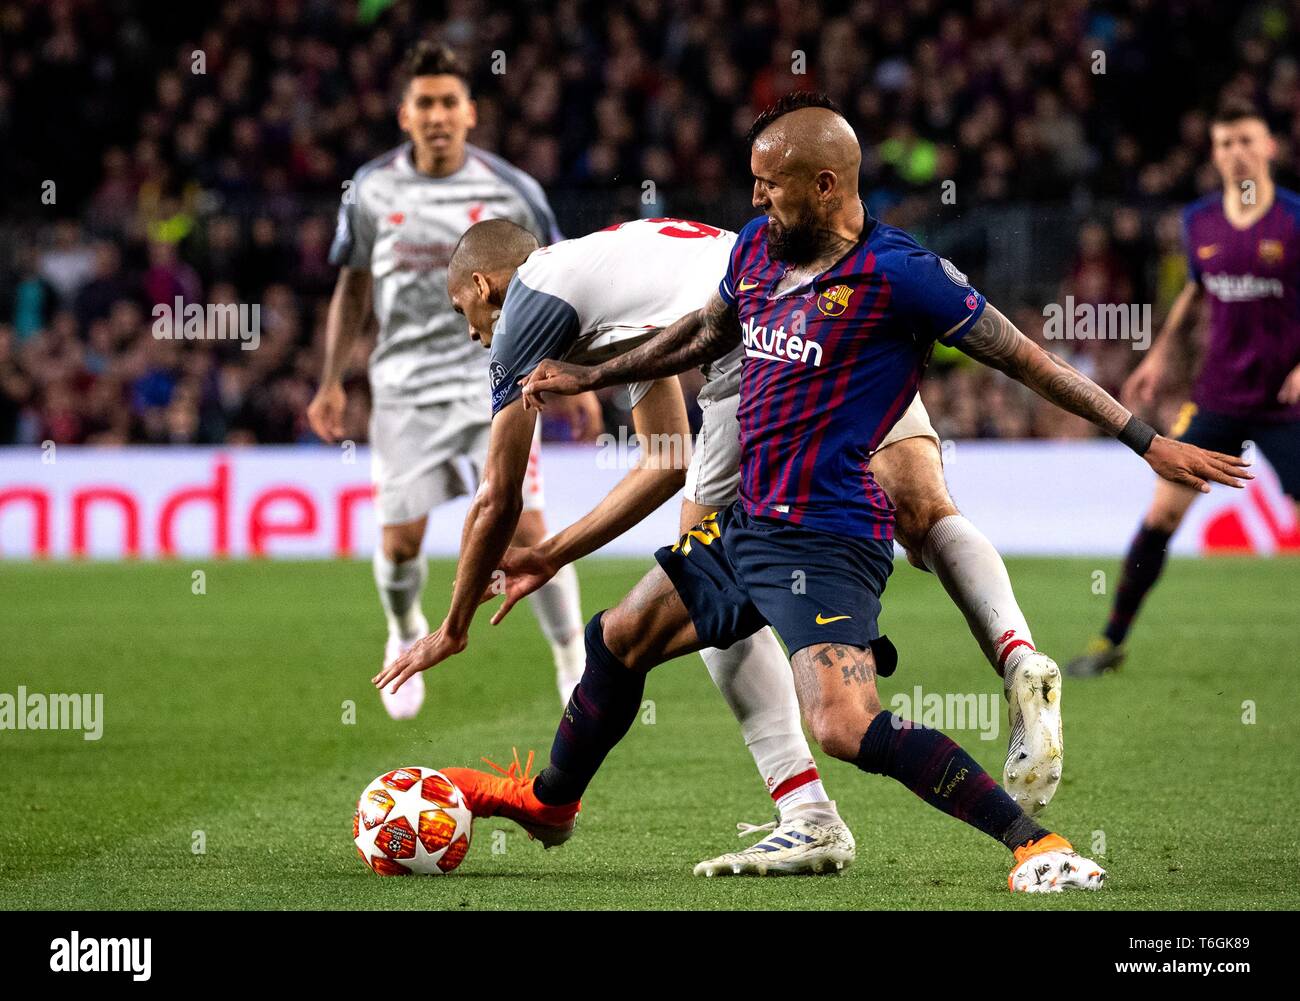 Barcelona, Spain. 1st May, 2019. FC Barcelona's Arturo Vidal (R front) vies with Liverpool's Joel Matip during the UEFA Champions League semifinal first leg soccer match between FC Barcelona and Liverpool in Barcelona, Spain, on May 1, 2019. Barcelona won 3-0. Credit: Joan Gosa/Xinhua/Alamy Live News Stock Photo